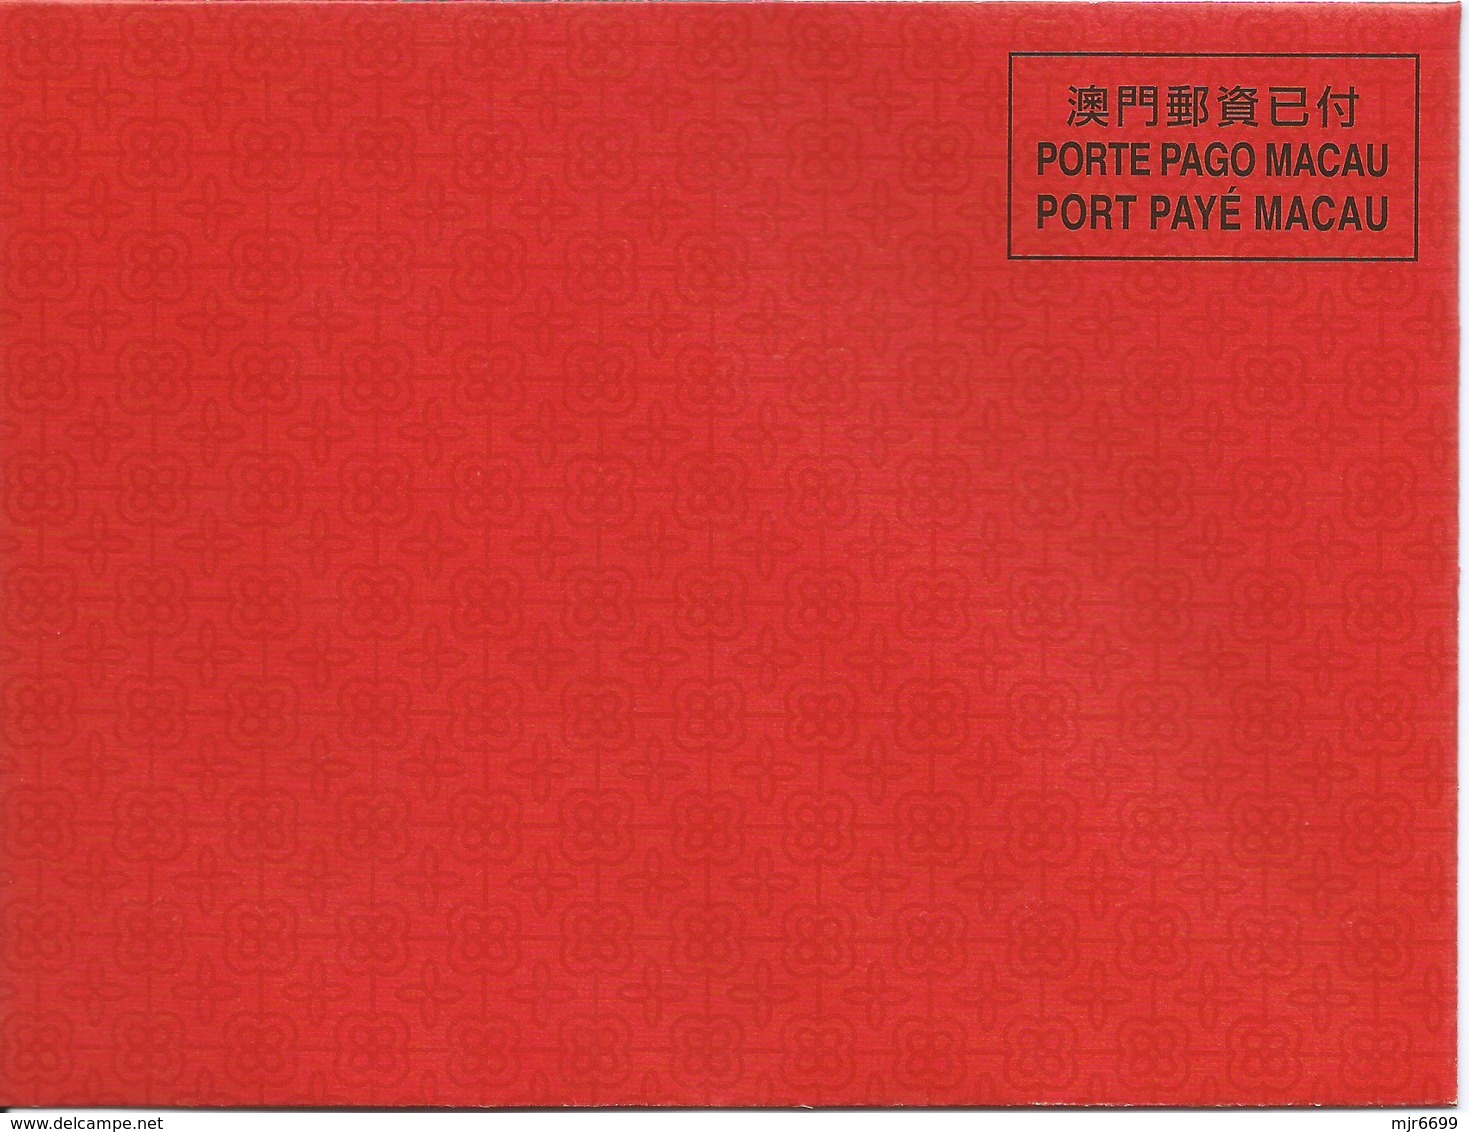 MACAU 2020 LUNAR YEAR OF THE RAT GREETING CARD & POSTAGE PAID COVER - Postal Stationery